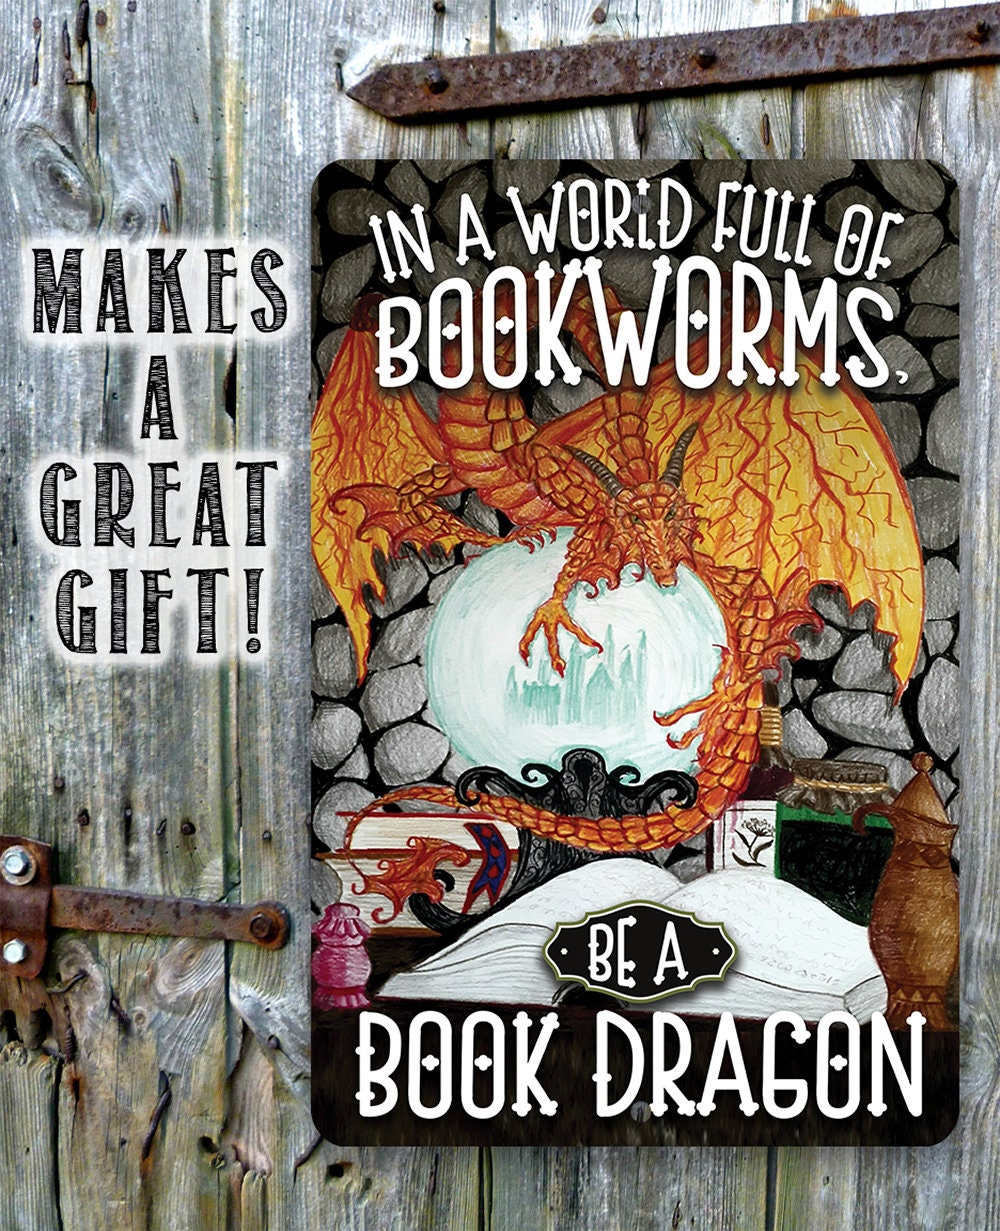 In A World Full Of Bookworms, Be A Dragon - 8" x 12" or 12" x 18" Aluminum Tin Awesome Metal Poster Lone Star Art 